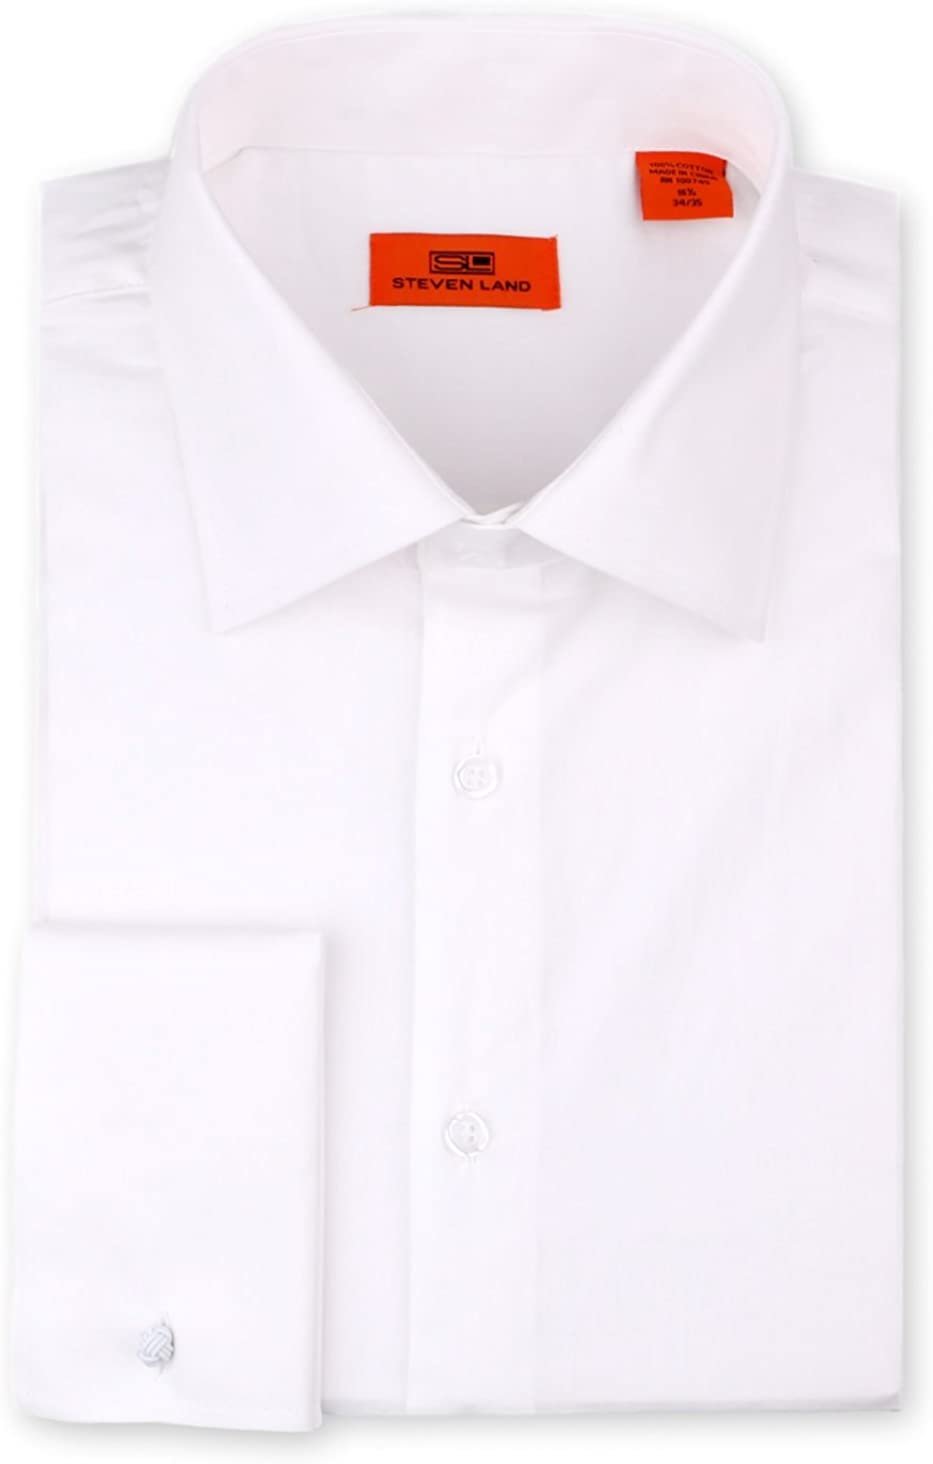 Steven Land Men's Signature Solid Poplin Dress Shirt 100% Cotton French Cuff Also Available Big and Tall - CLEARANCE - FINAL SALE